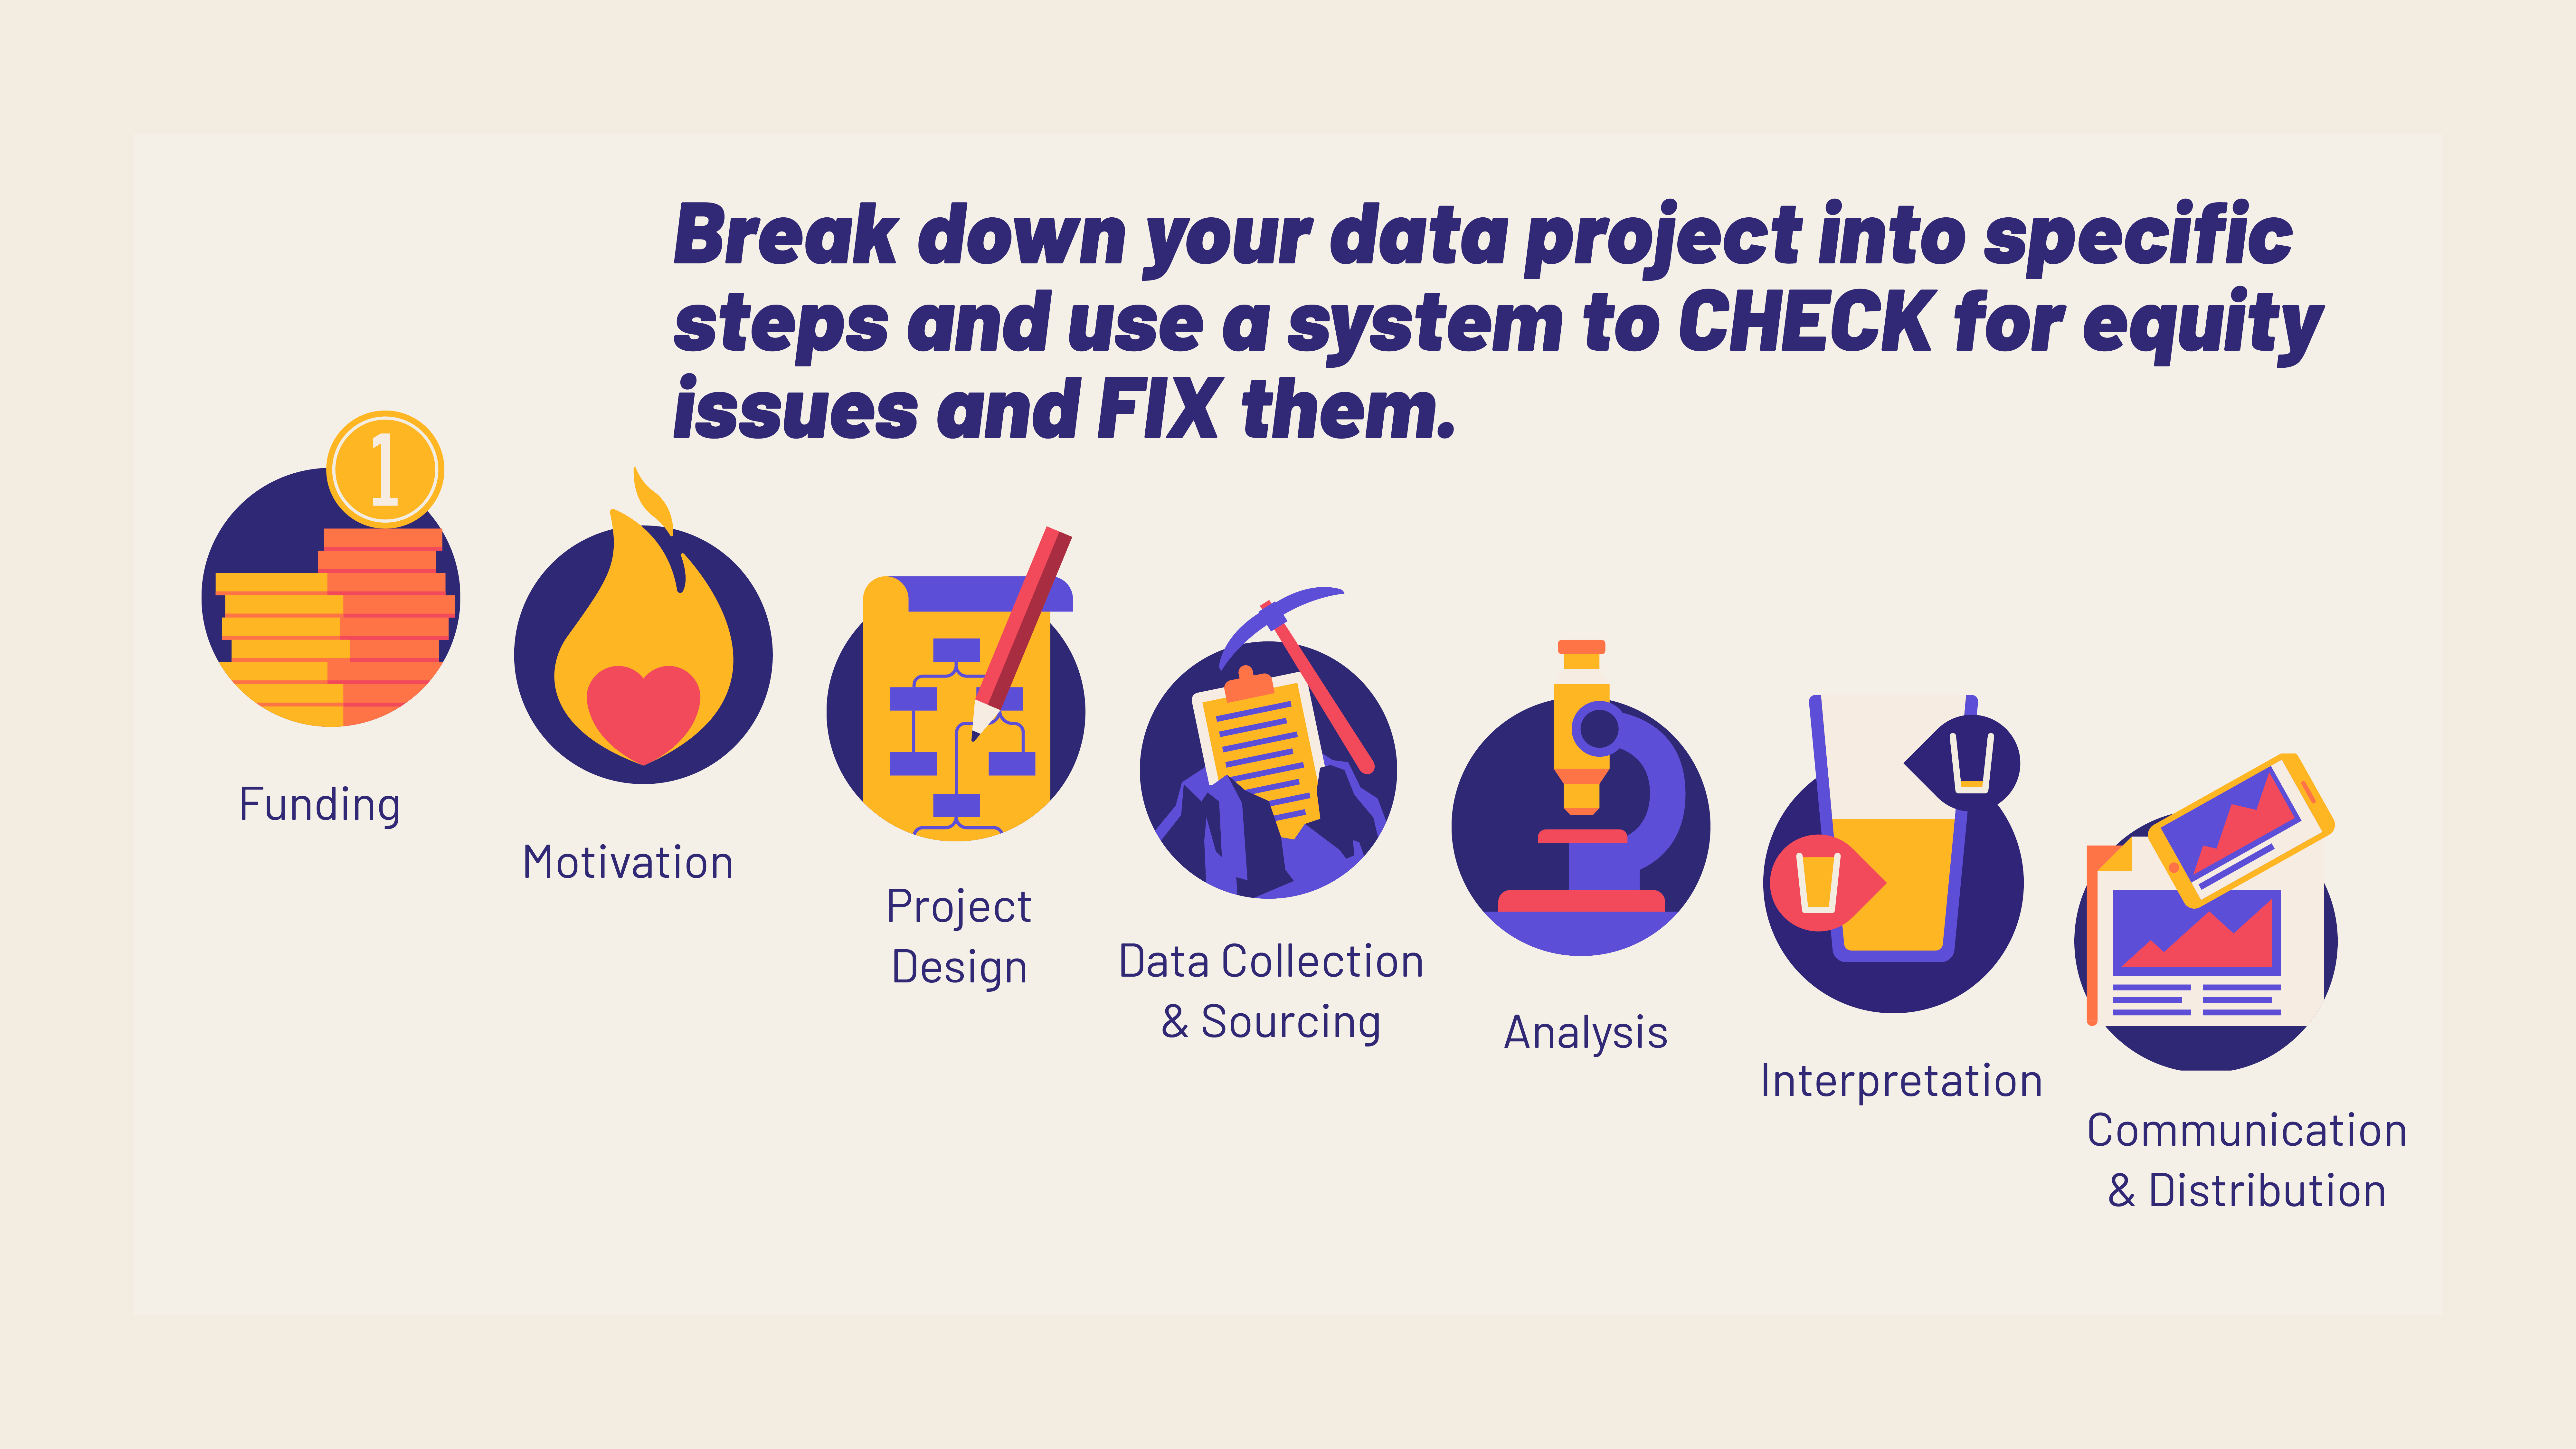 Break down your data project into specific steps and use a system to CHECK for equity issues and FIX them: Funding, motivation, project design, data collection and sourcing, analysis, interpretation, communication and distribution